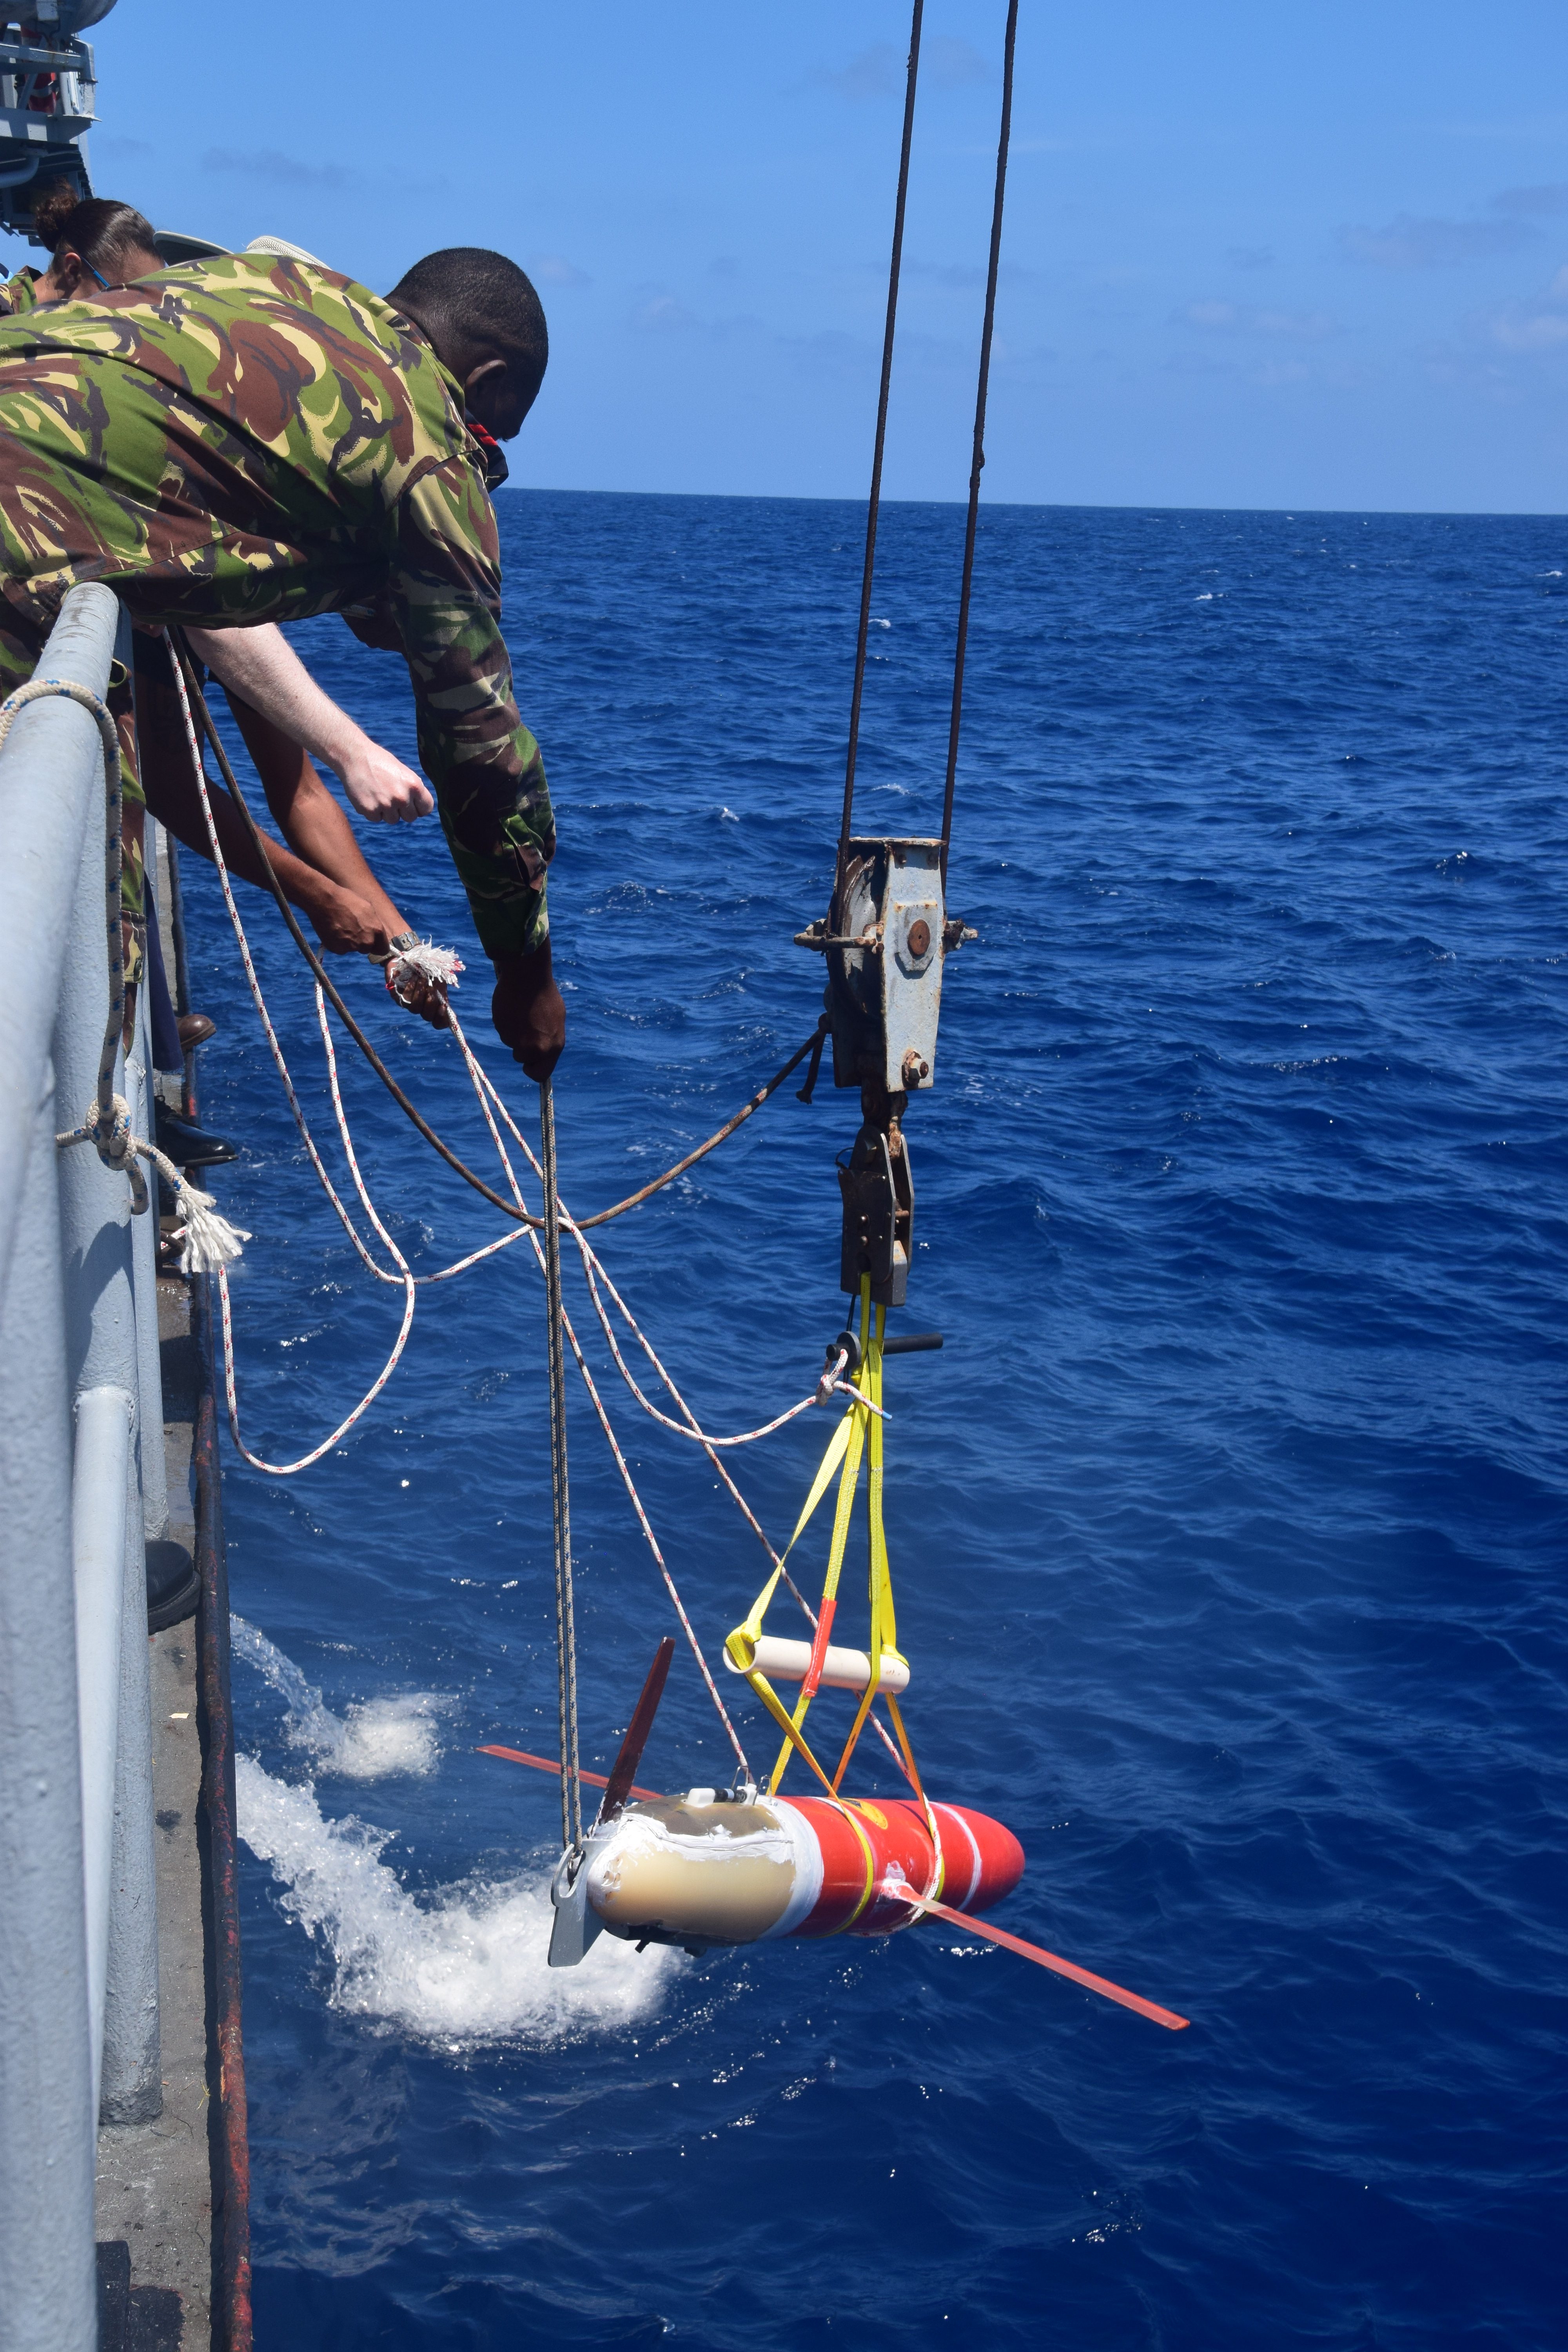 Releasing the glider into the water. (Photo: Joleen Heiderich, MIT/WHOI Joint Program)